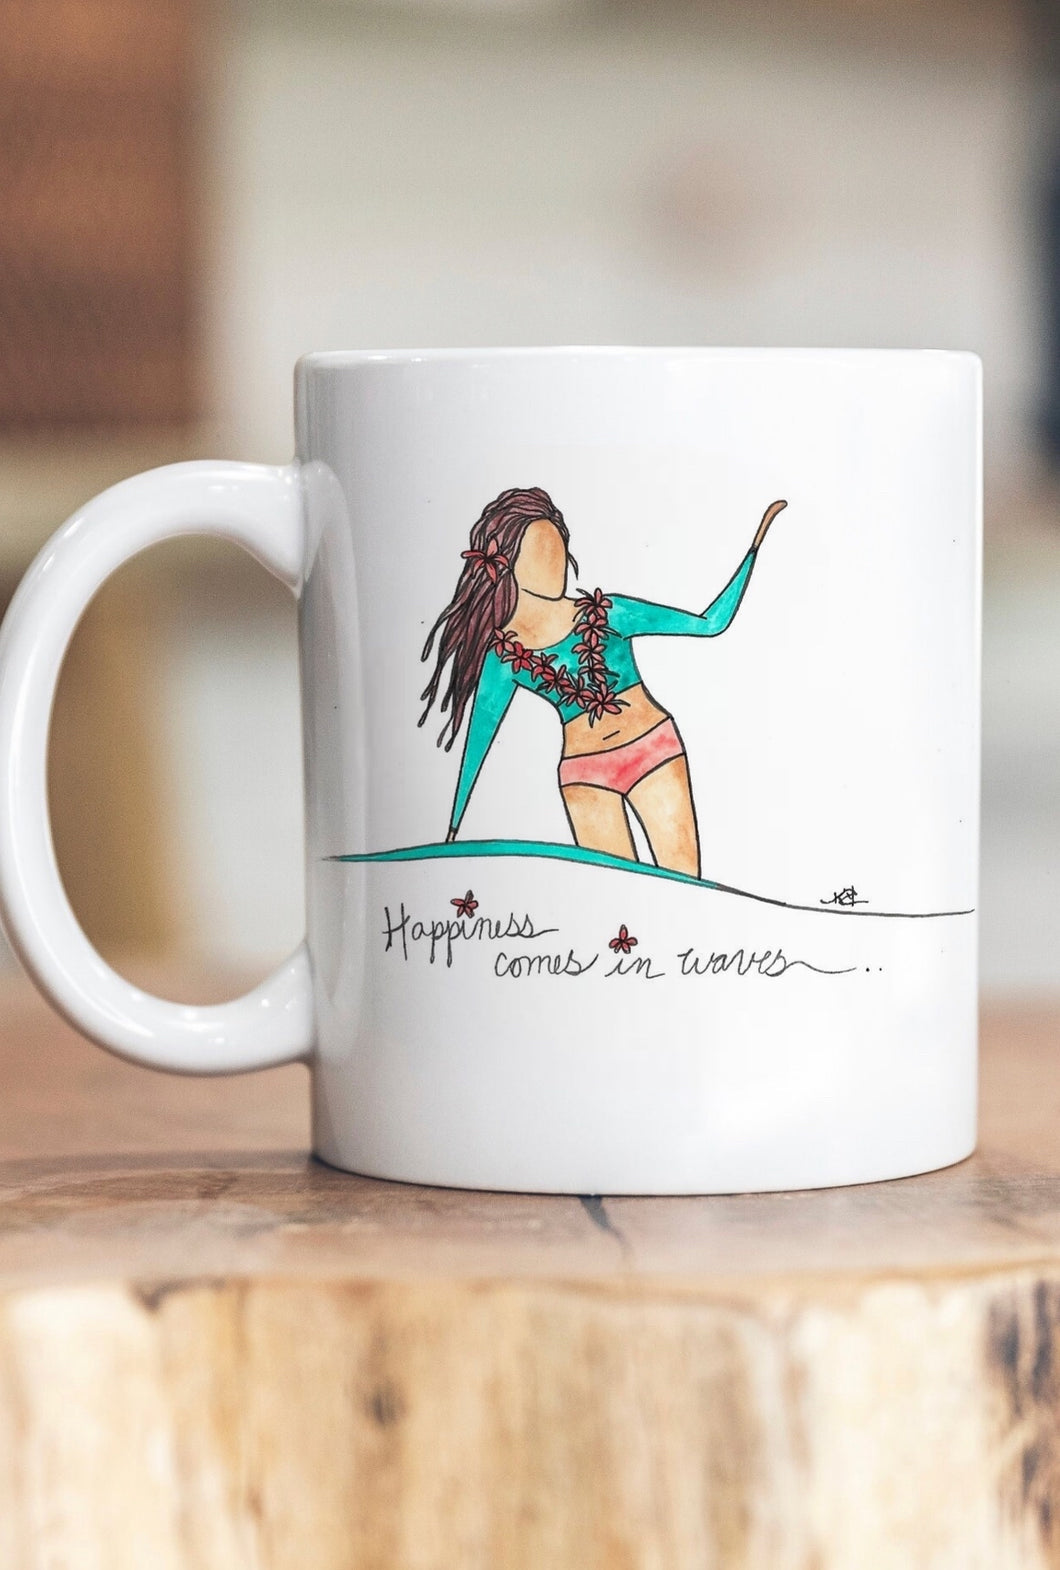 Happiness comes in Waves mug